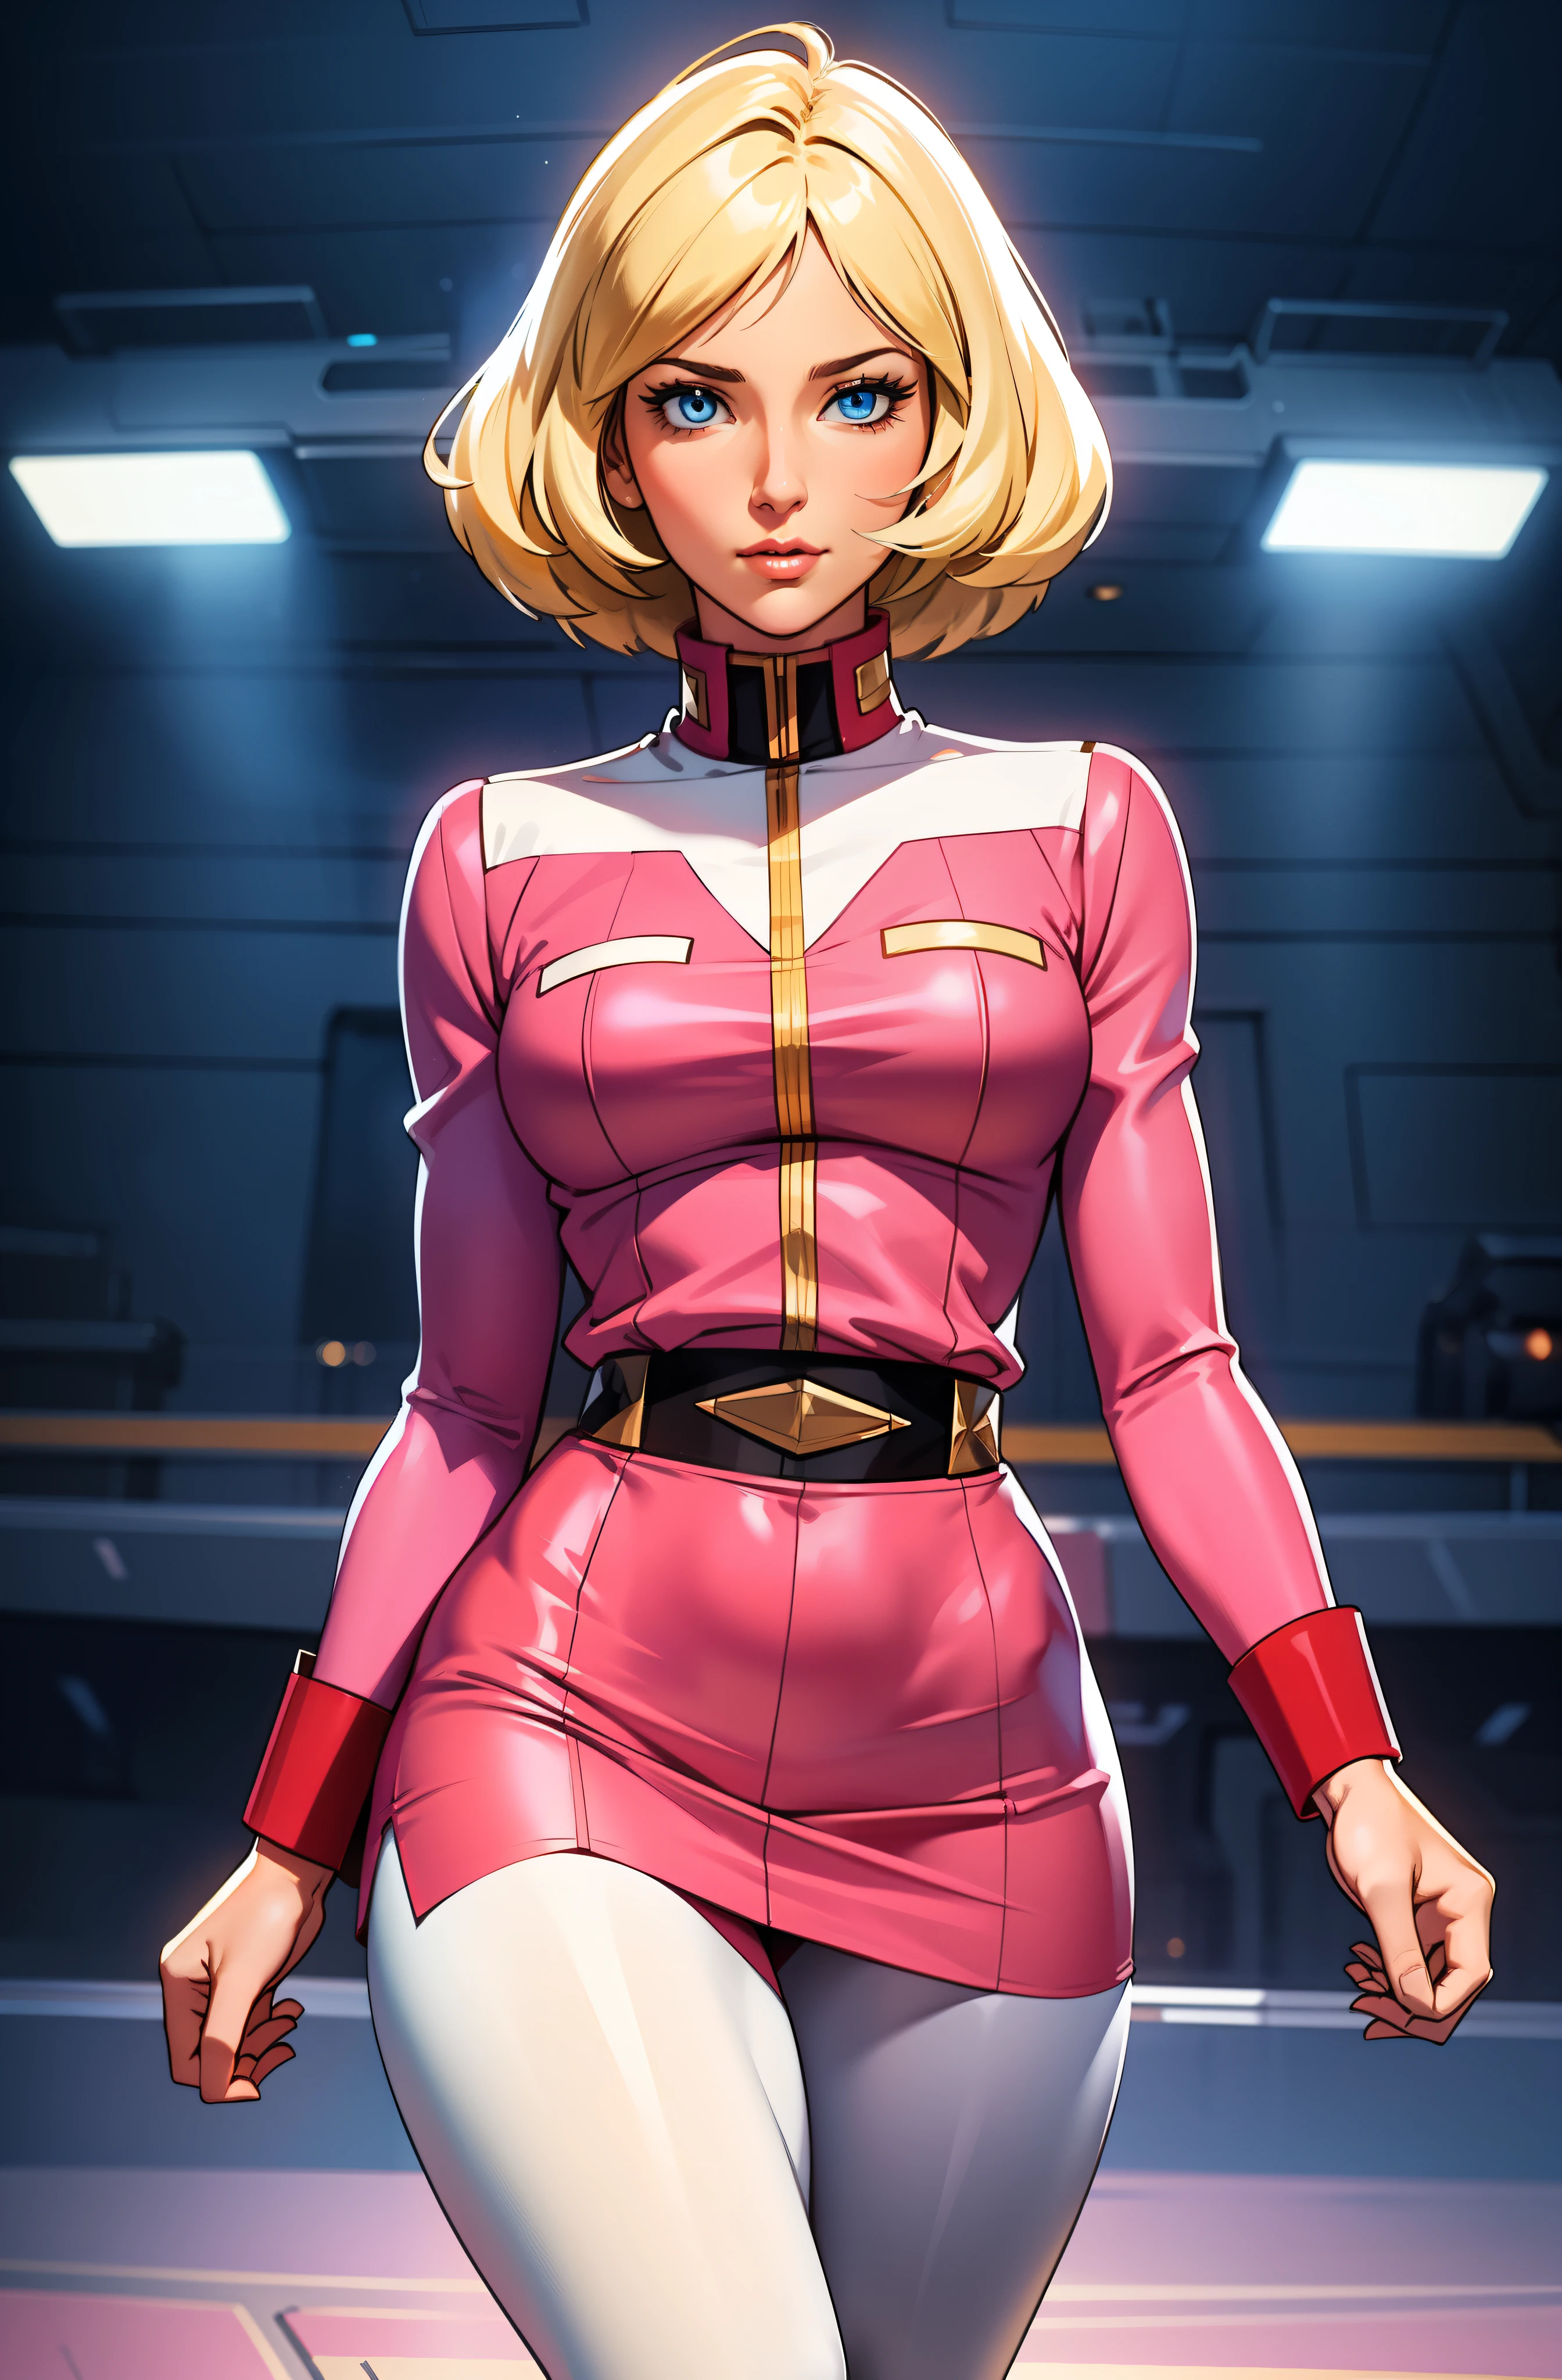 ((masterpiece)), ((cinematic lighting)), realistic photo、Real Images、Top image quality、1girl in, sayla mass, Elegant, masterpiece, Convoluted, slim arms, wide hips, thick thighs, thigh gaps, Best Quality, absurderes, high face detail, Perfect eyes, mature, Cowboy Shot, , Vibrant colors, soft pink uniform, soft pink Skirt, white tights